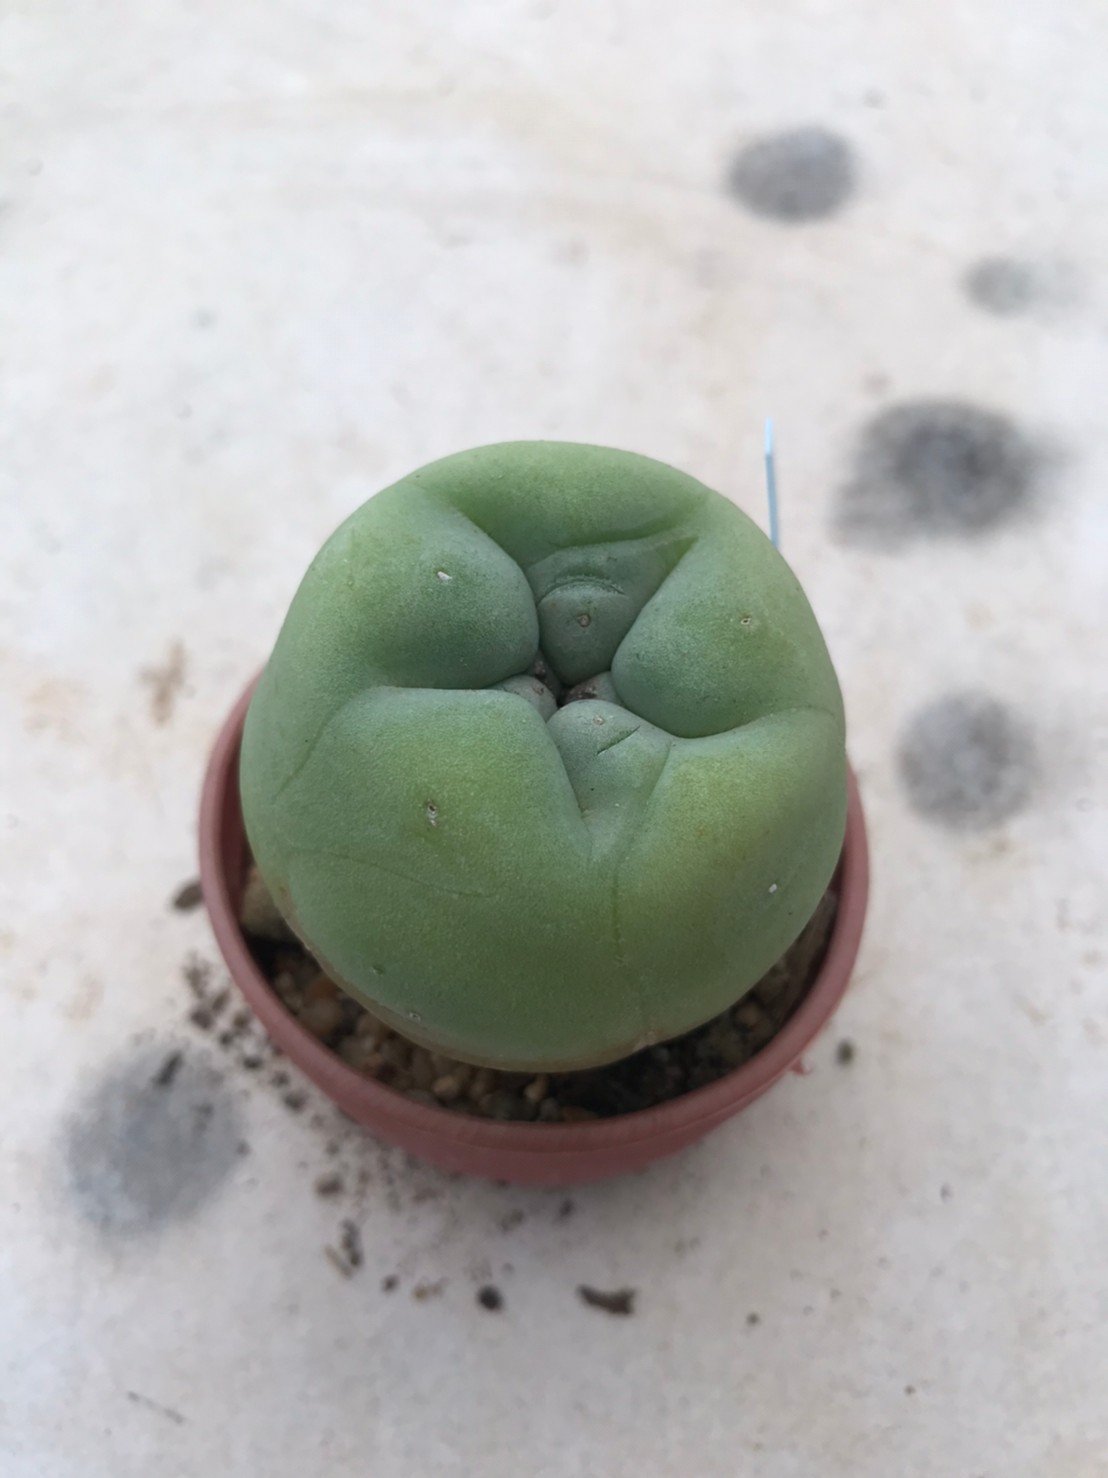 Lophophora diffusa 10 years old-grow from seed-can give flower and seed